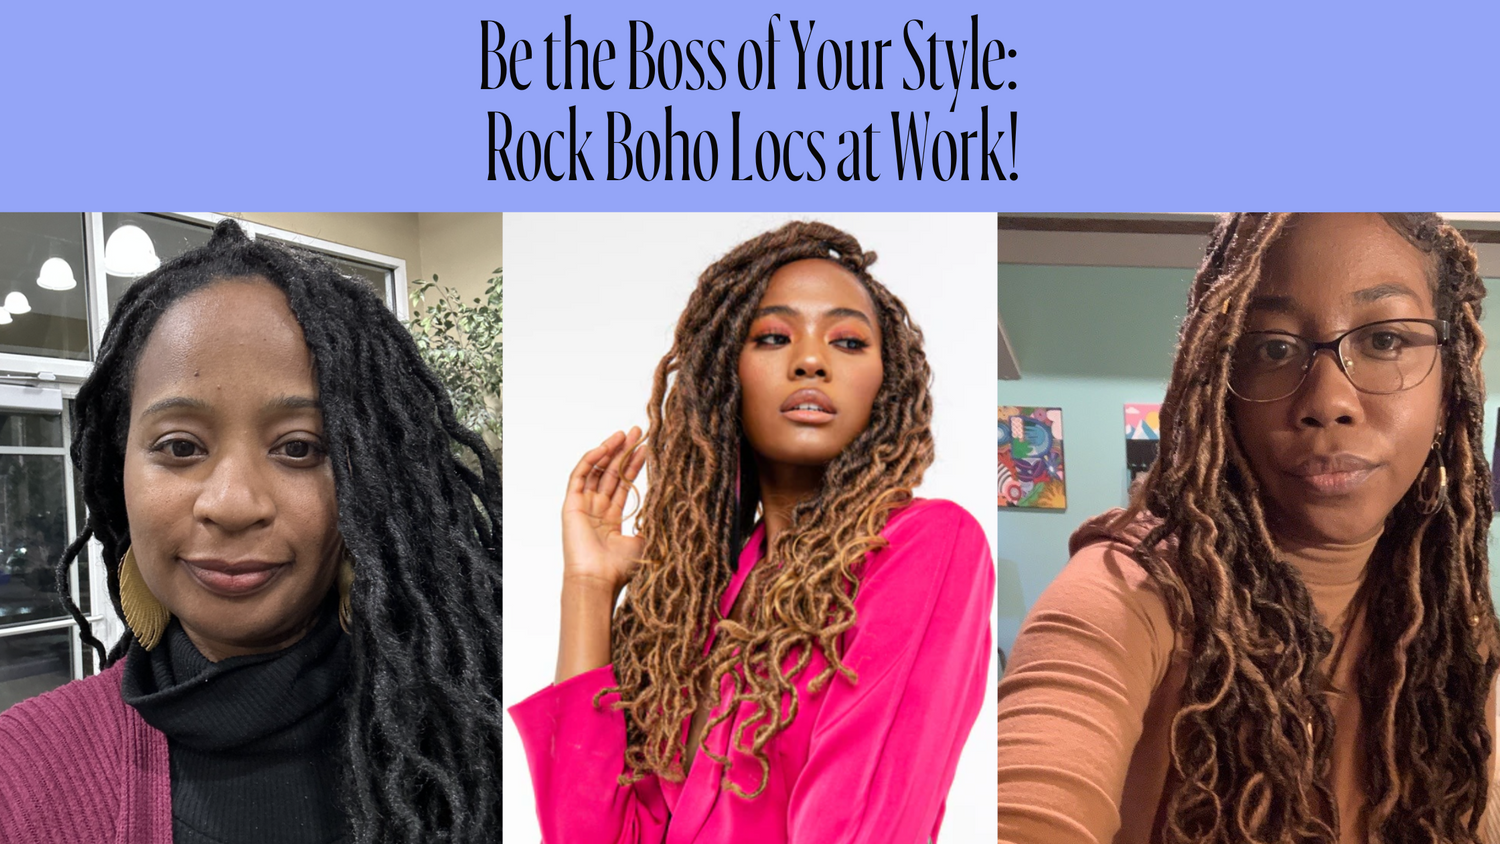 Be the Boss of Your Style: Rock Boho Locs at Work!